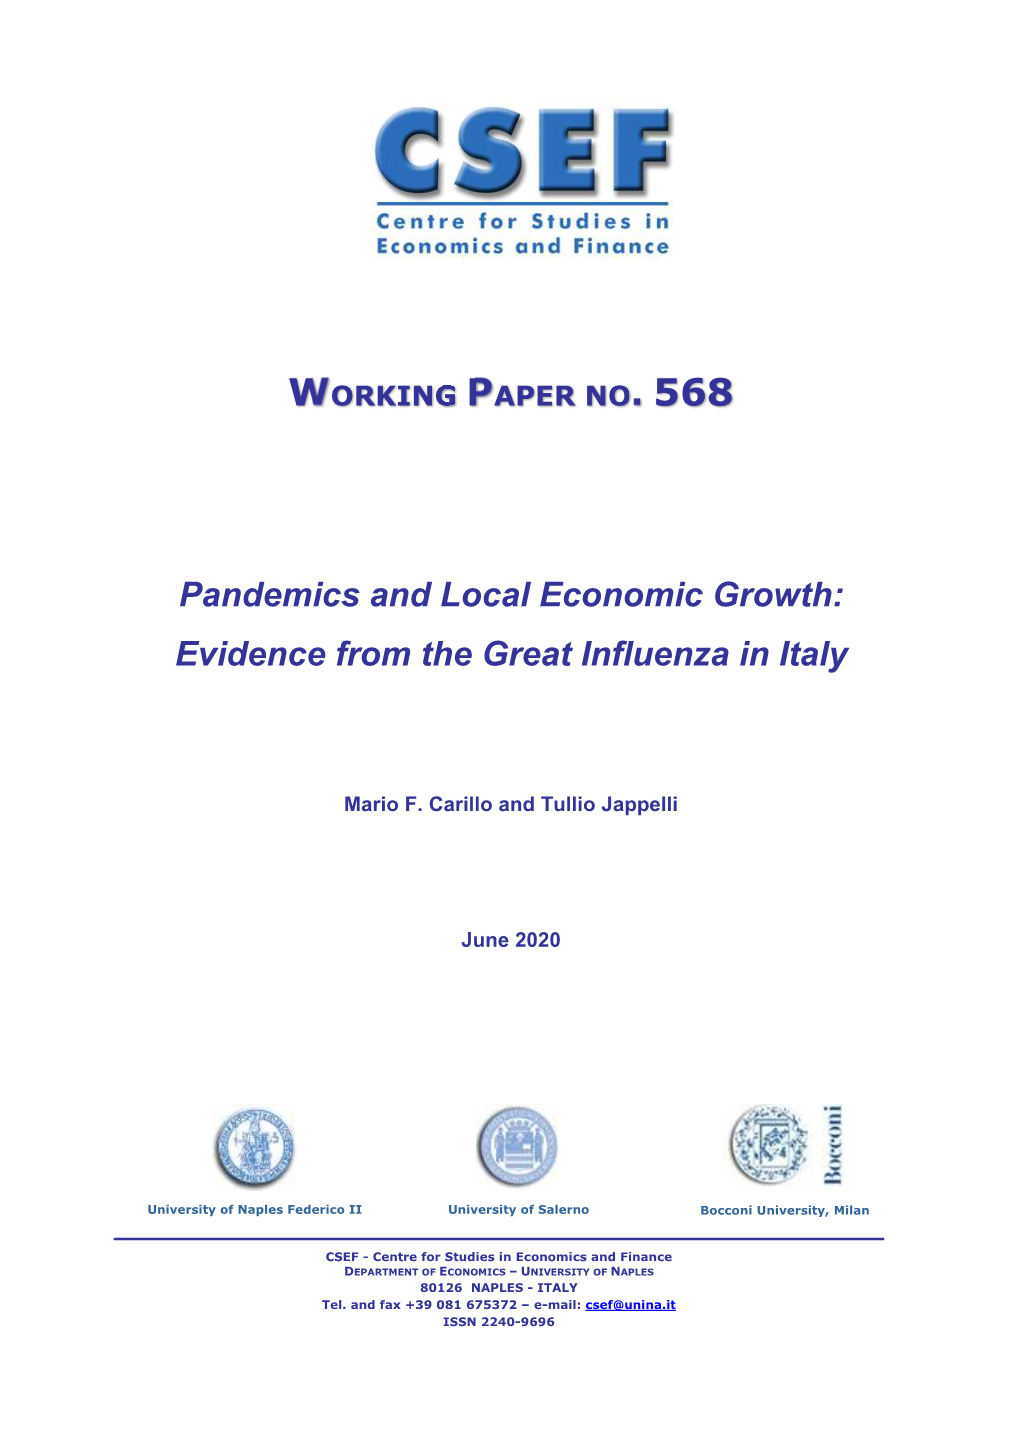 Pandemics and Local Economic Growth: Evidence from the Great Influenza in Italy